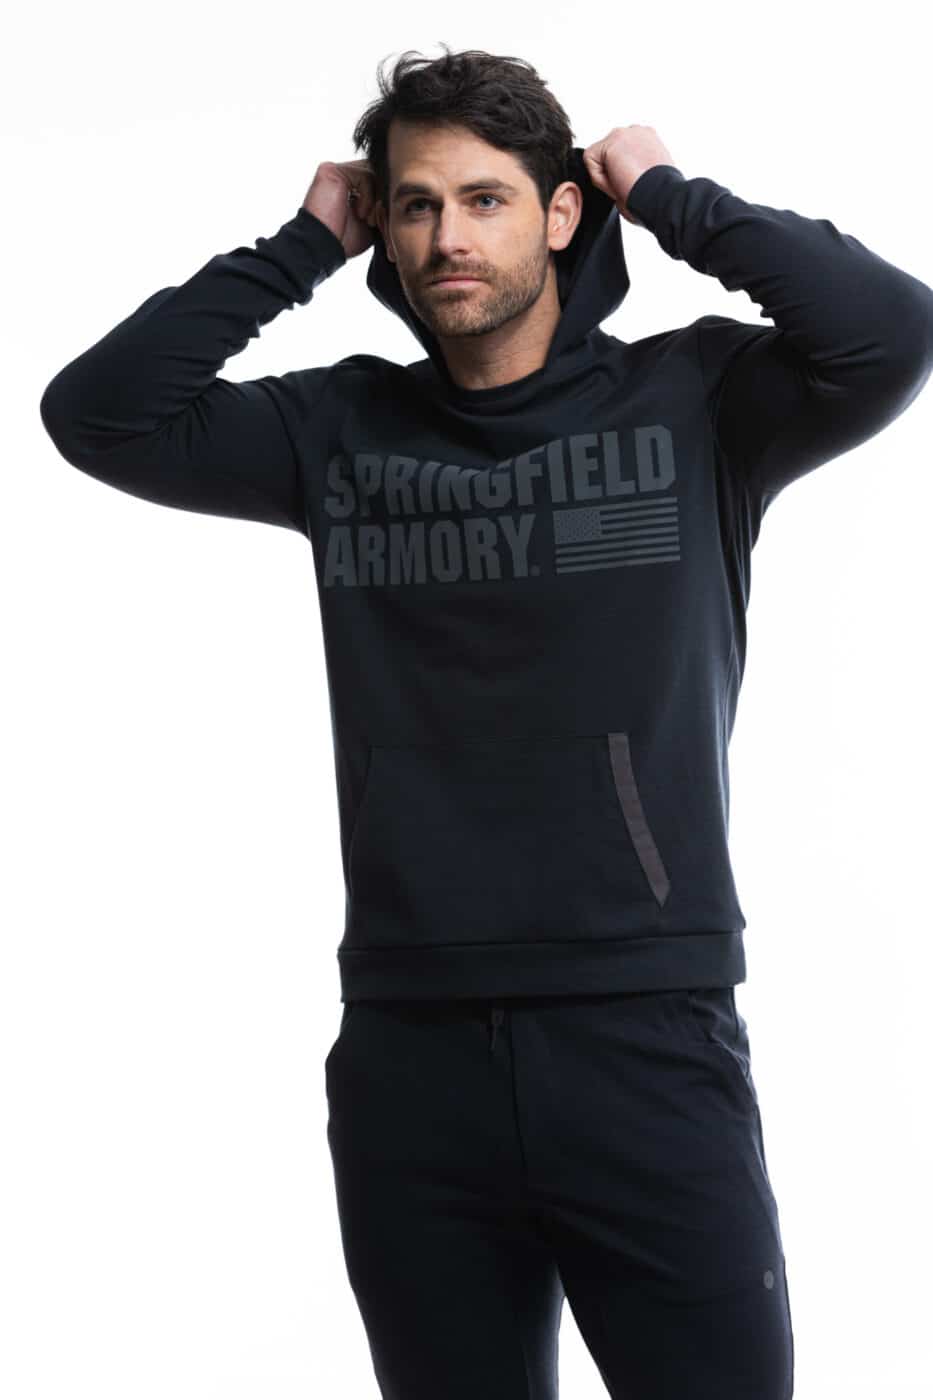 Man modeling Premium Hoodie from the Alexo Athletica x Springfield Armory collection